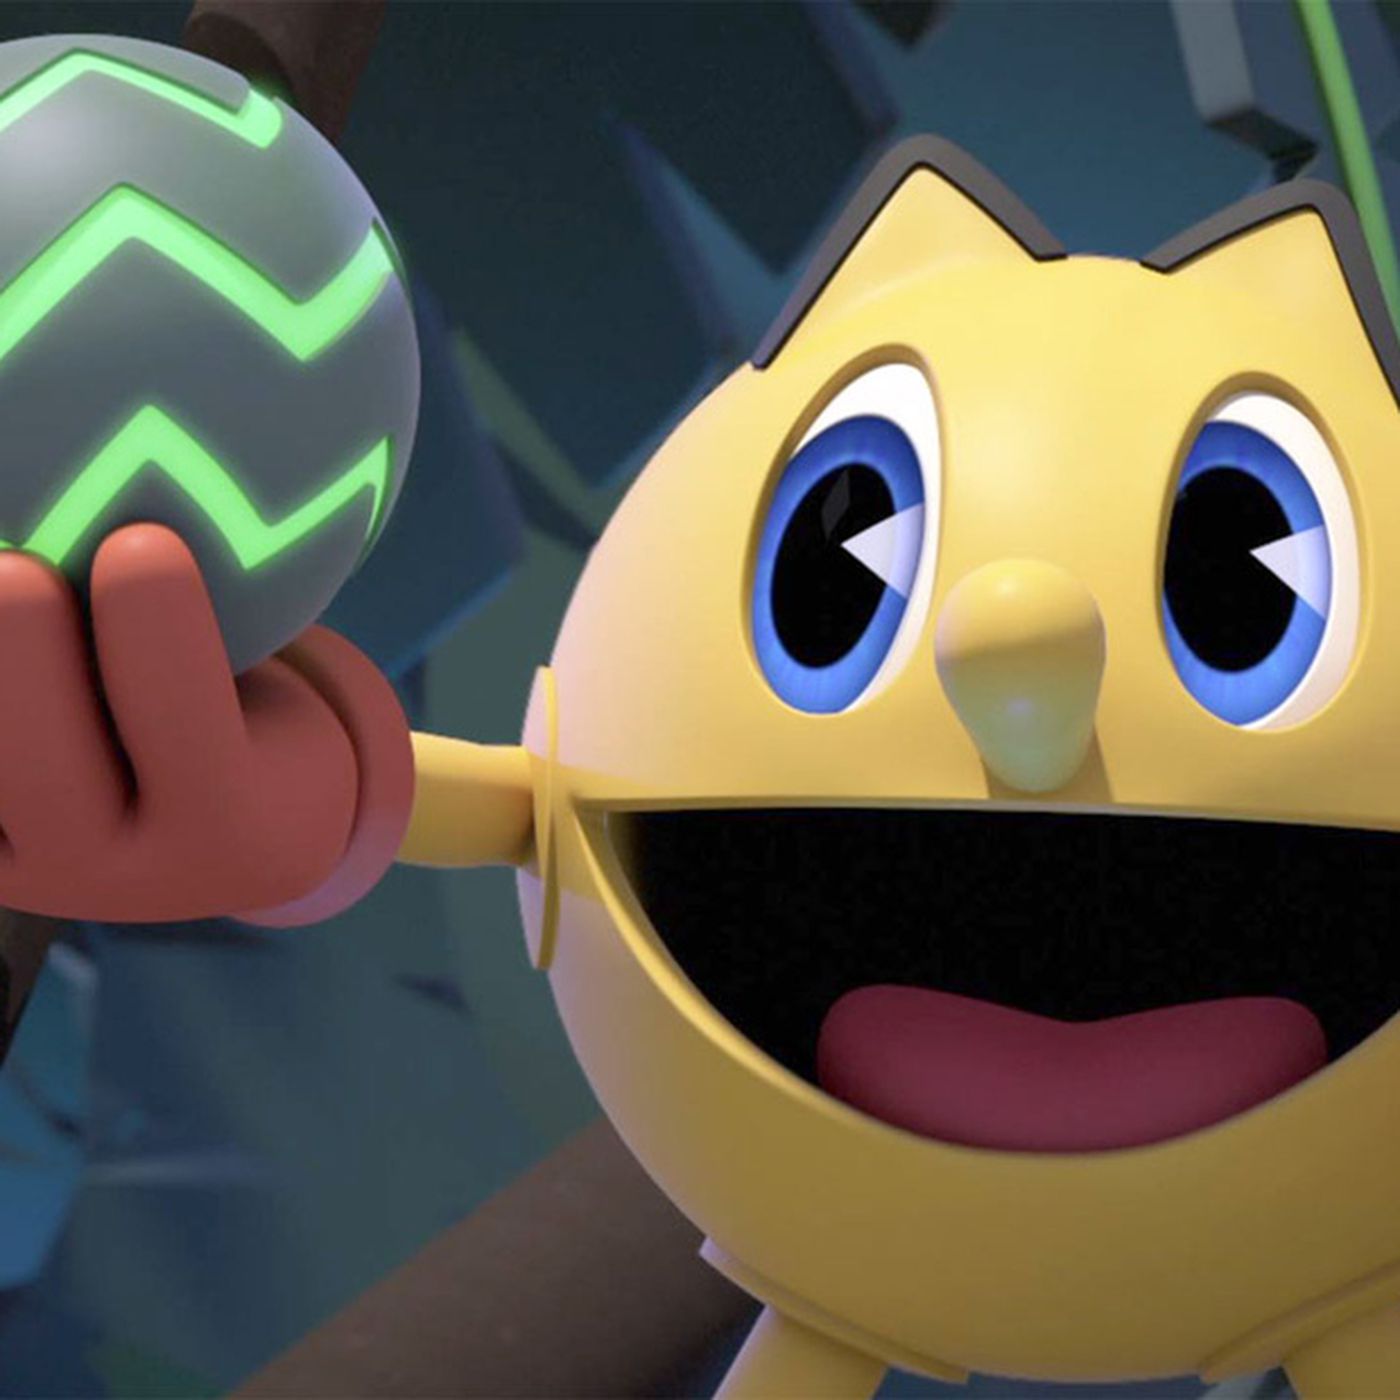 Pac Man And The Ghostly Adventures Arriving Nov. 5 For 3DS